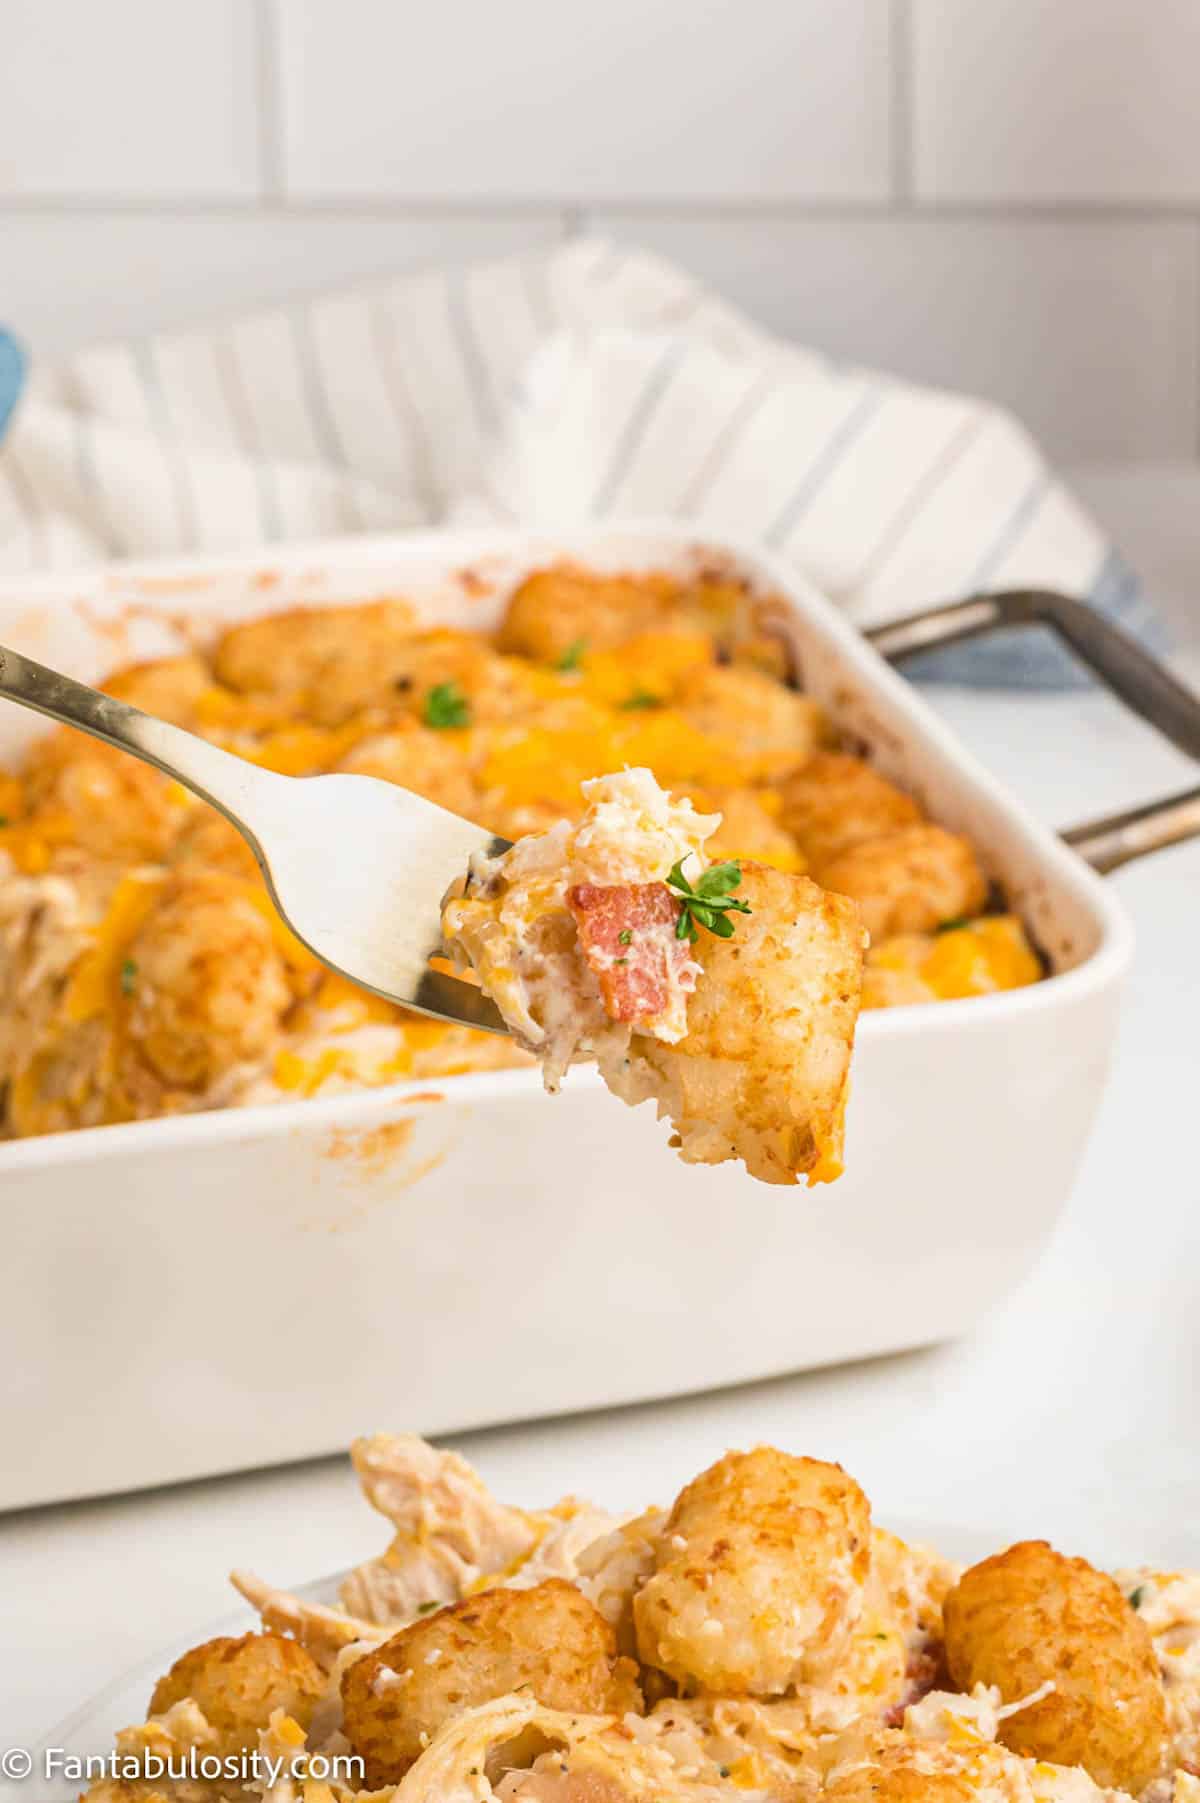 A fork holds a bite of creamy cheesy chicken casserole above a plate portion of the same meal